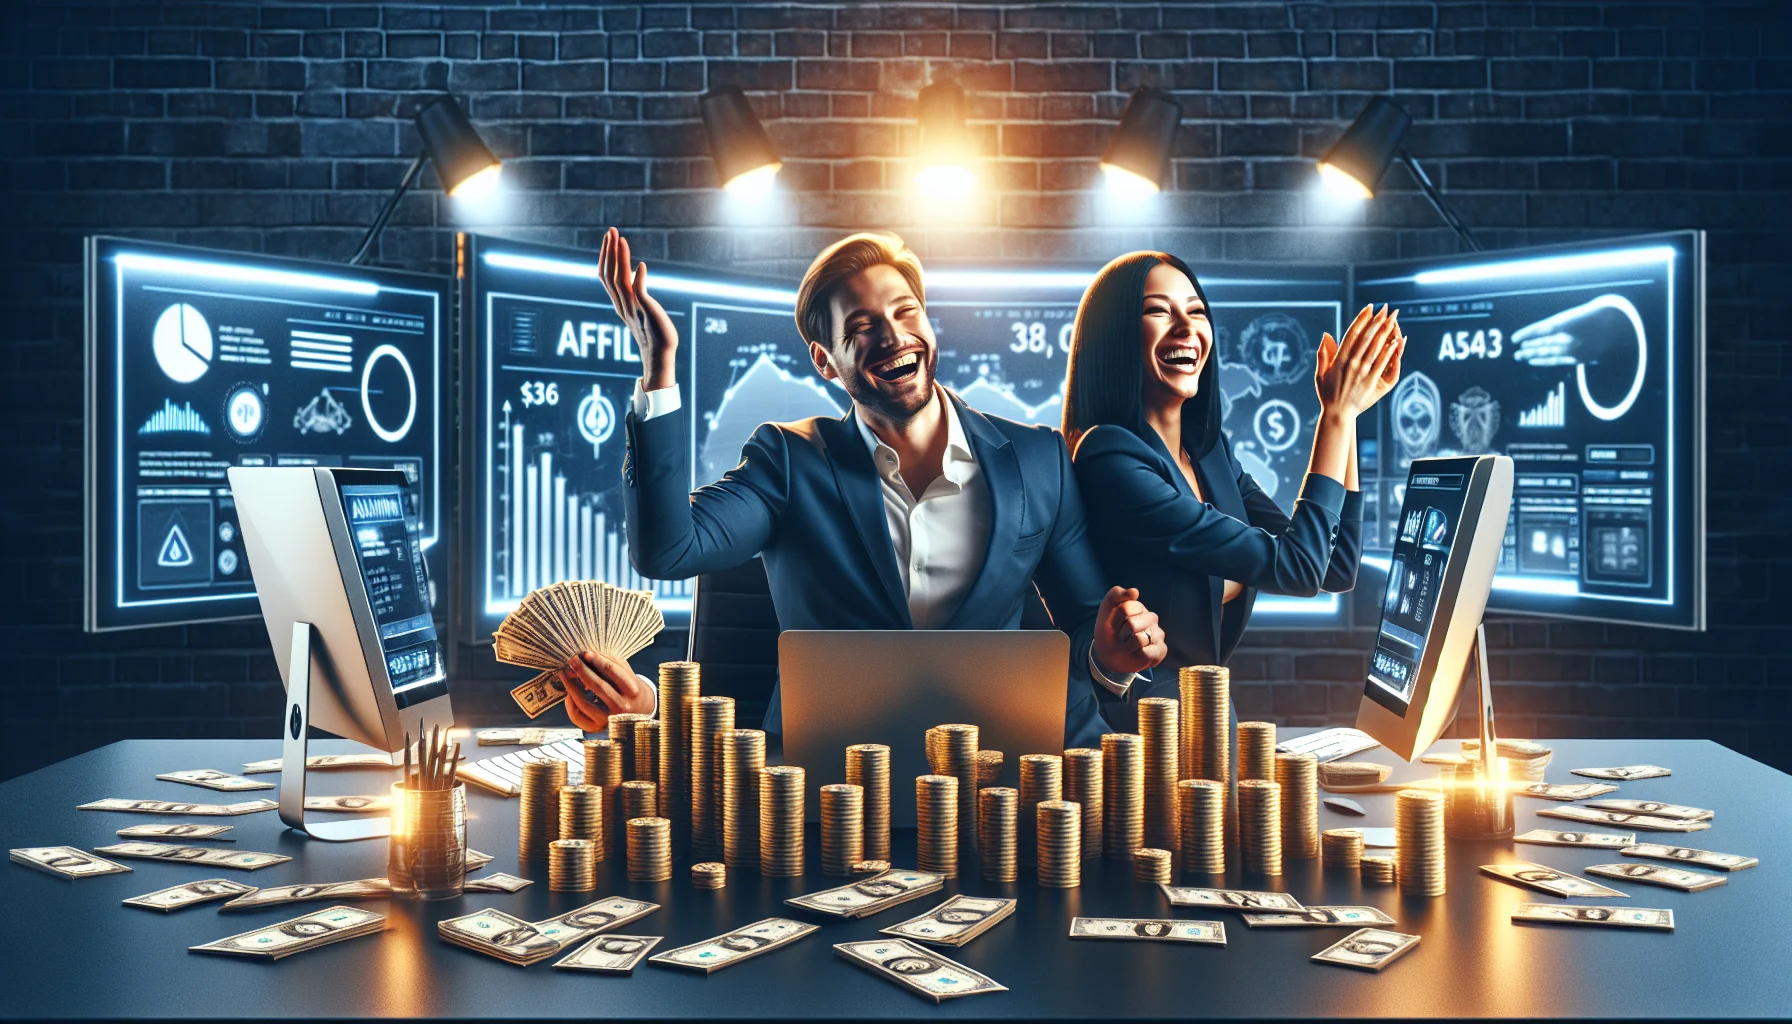 Imagine a light-hearted, realistic scene related to an online affiliate program. Picture a Caucasian woman and a South Asian man, both smartly dressed, sitting at a sleek modern desk, stacks of bills and gold coins neatly arranged on the surface. They are surrounded by multiple high tech computer screens showing various charts and graphs. They are laughing and high-fiving each other, celebrating their success. In the background, an illuminated signboard reading 'Affiliate Marketing' hangs on a brick wall. A generic brand logo of a butterfly sits prominently amidst the scene, symbolizing the program they're associated with.